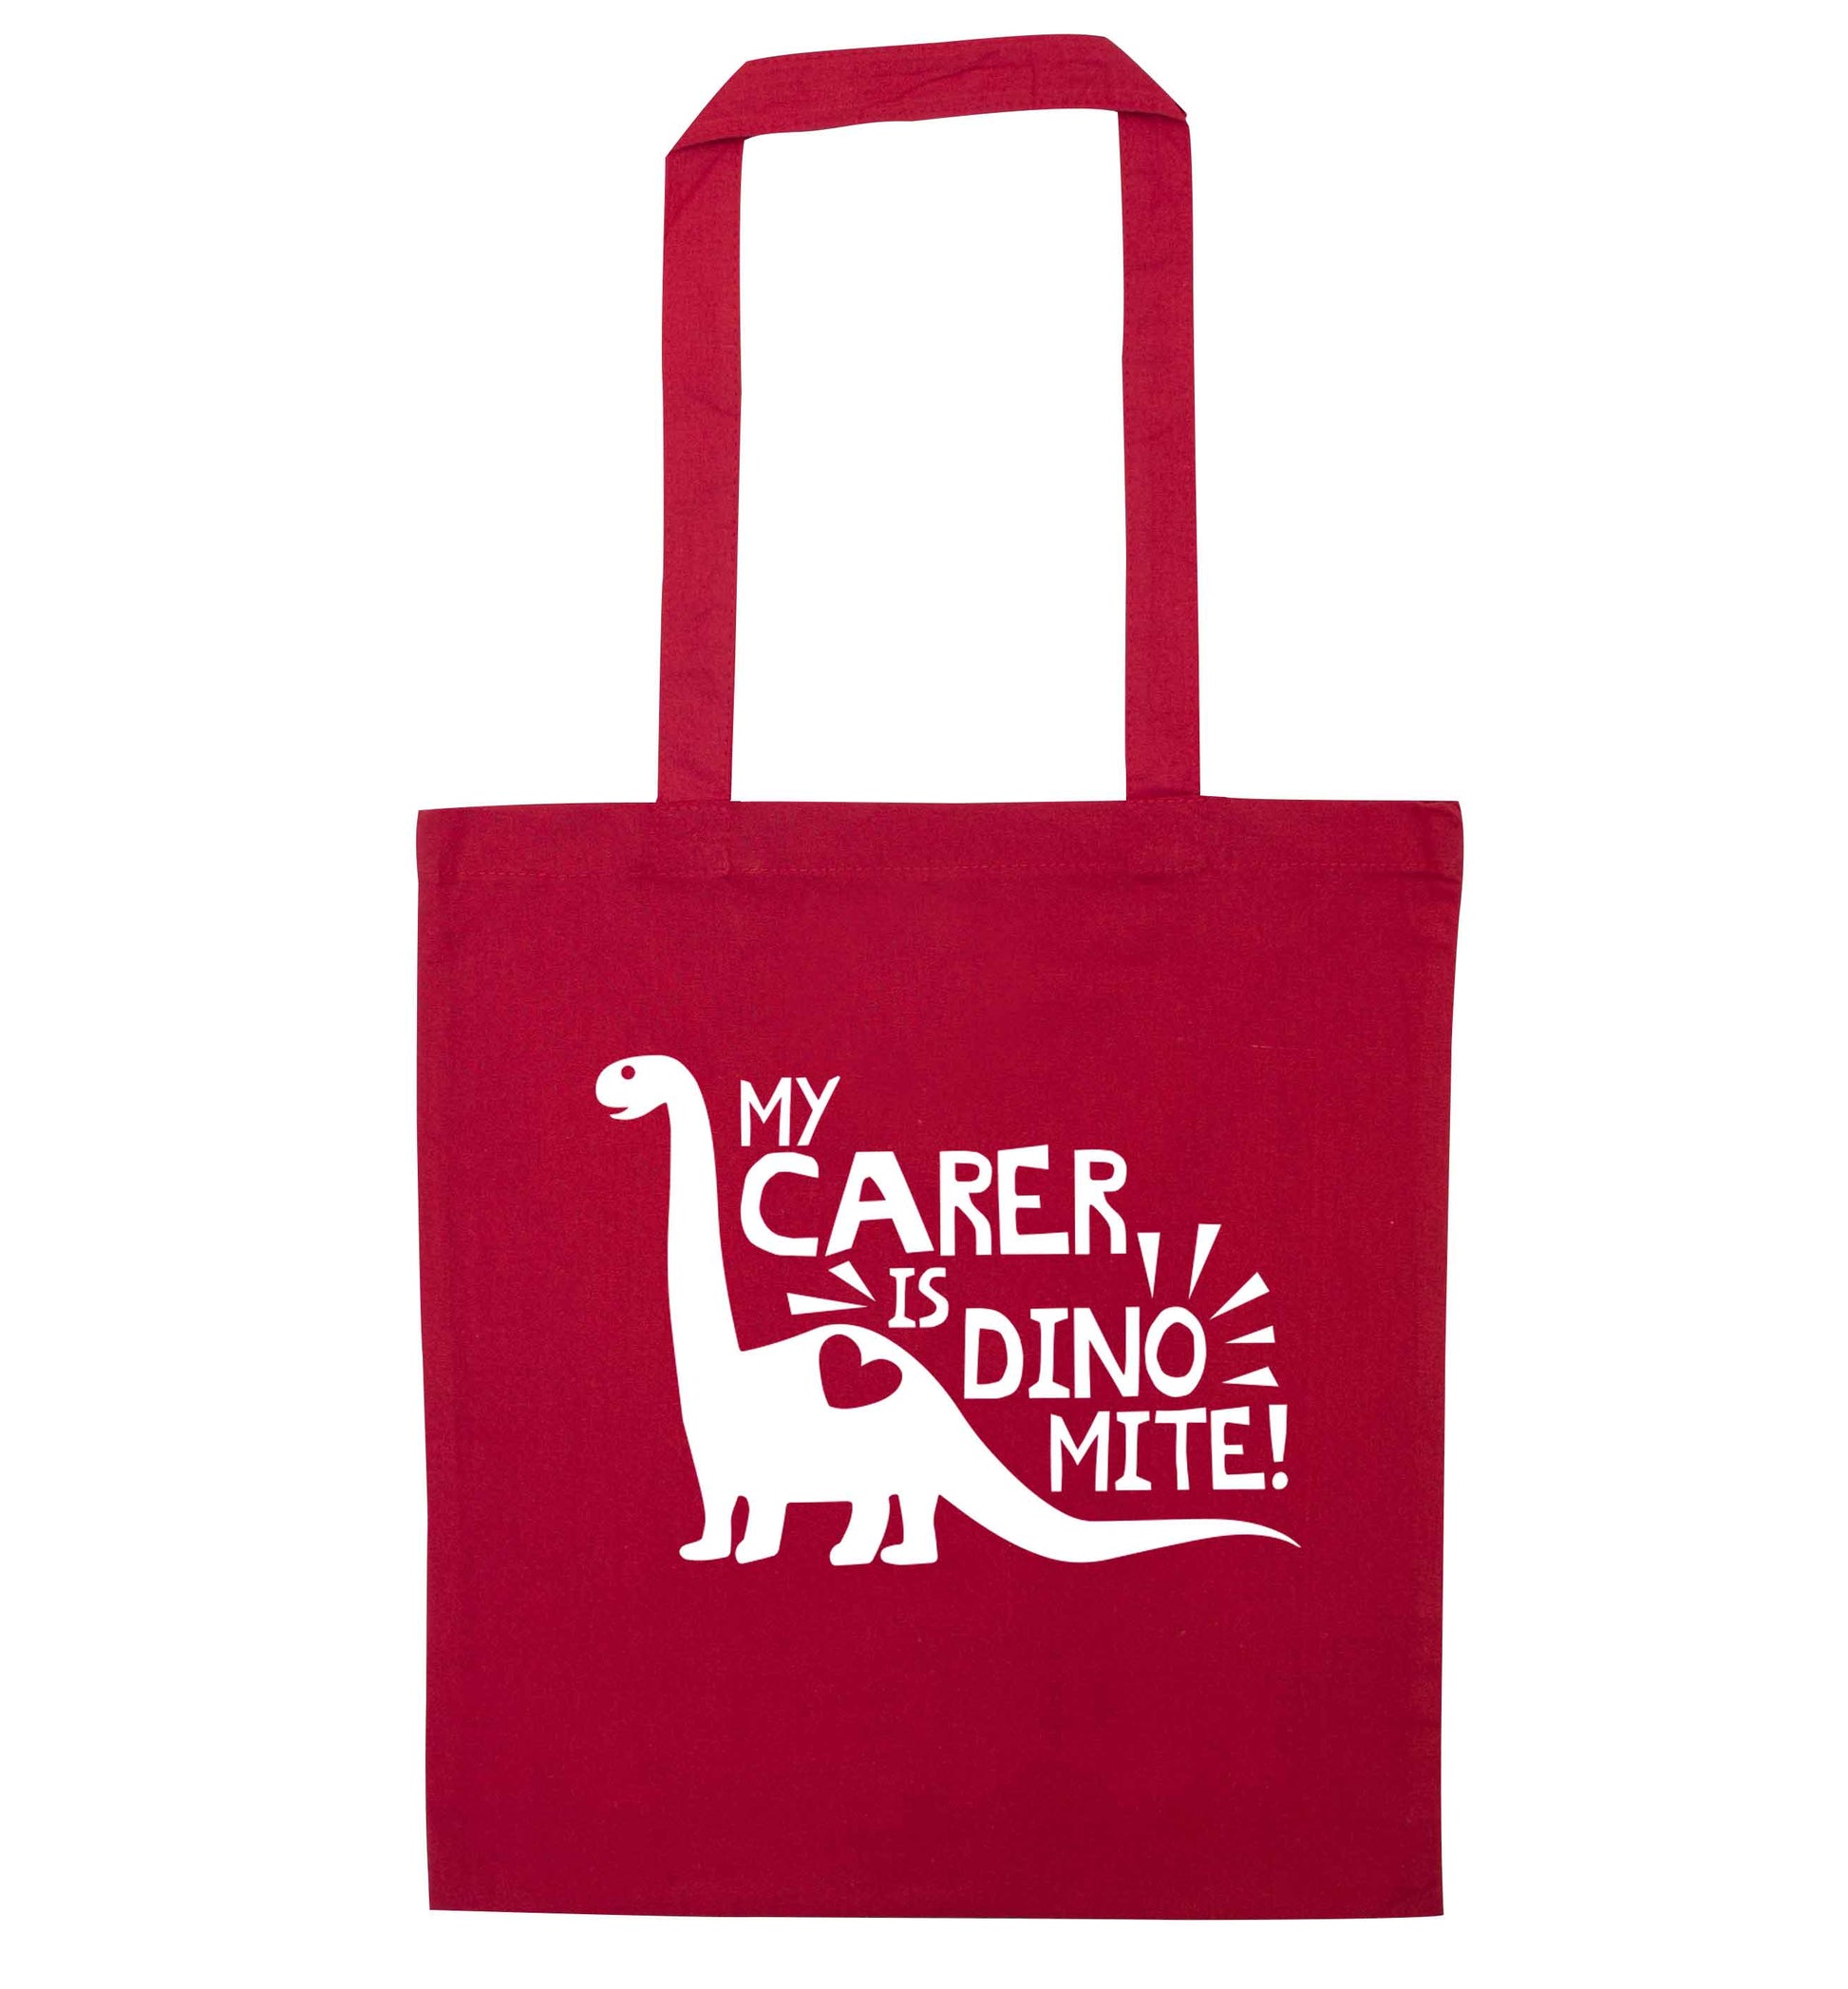 My carer is dinomite! red tote bag